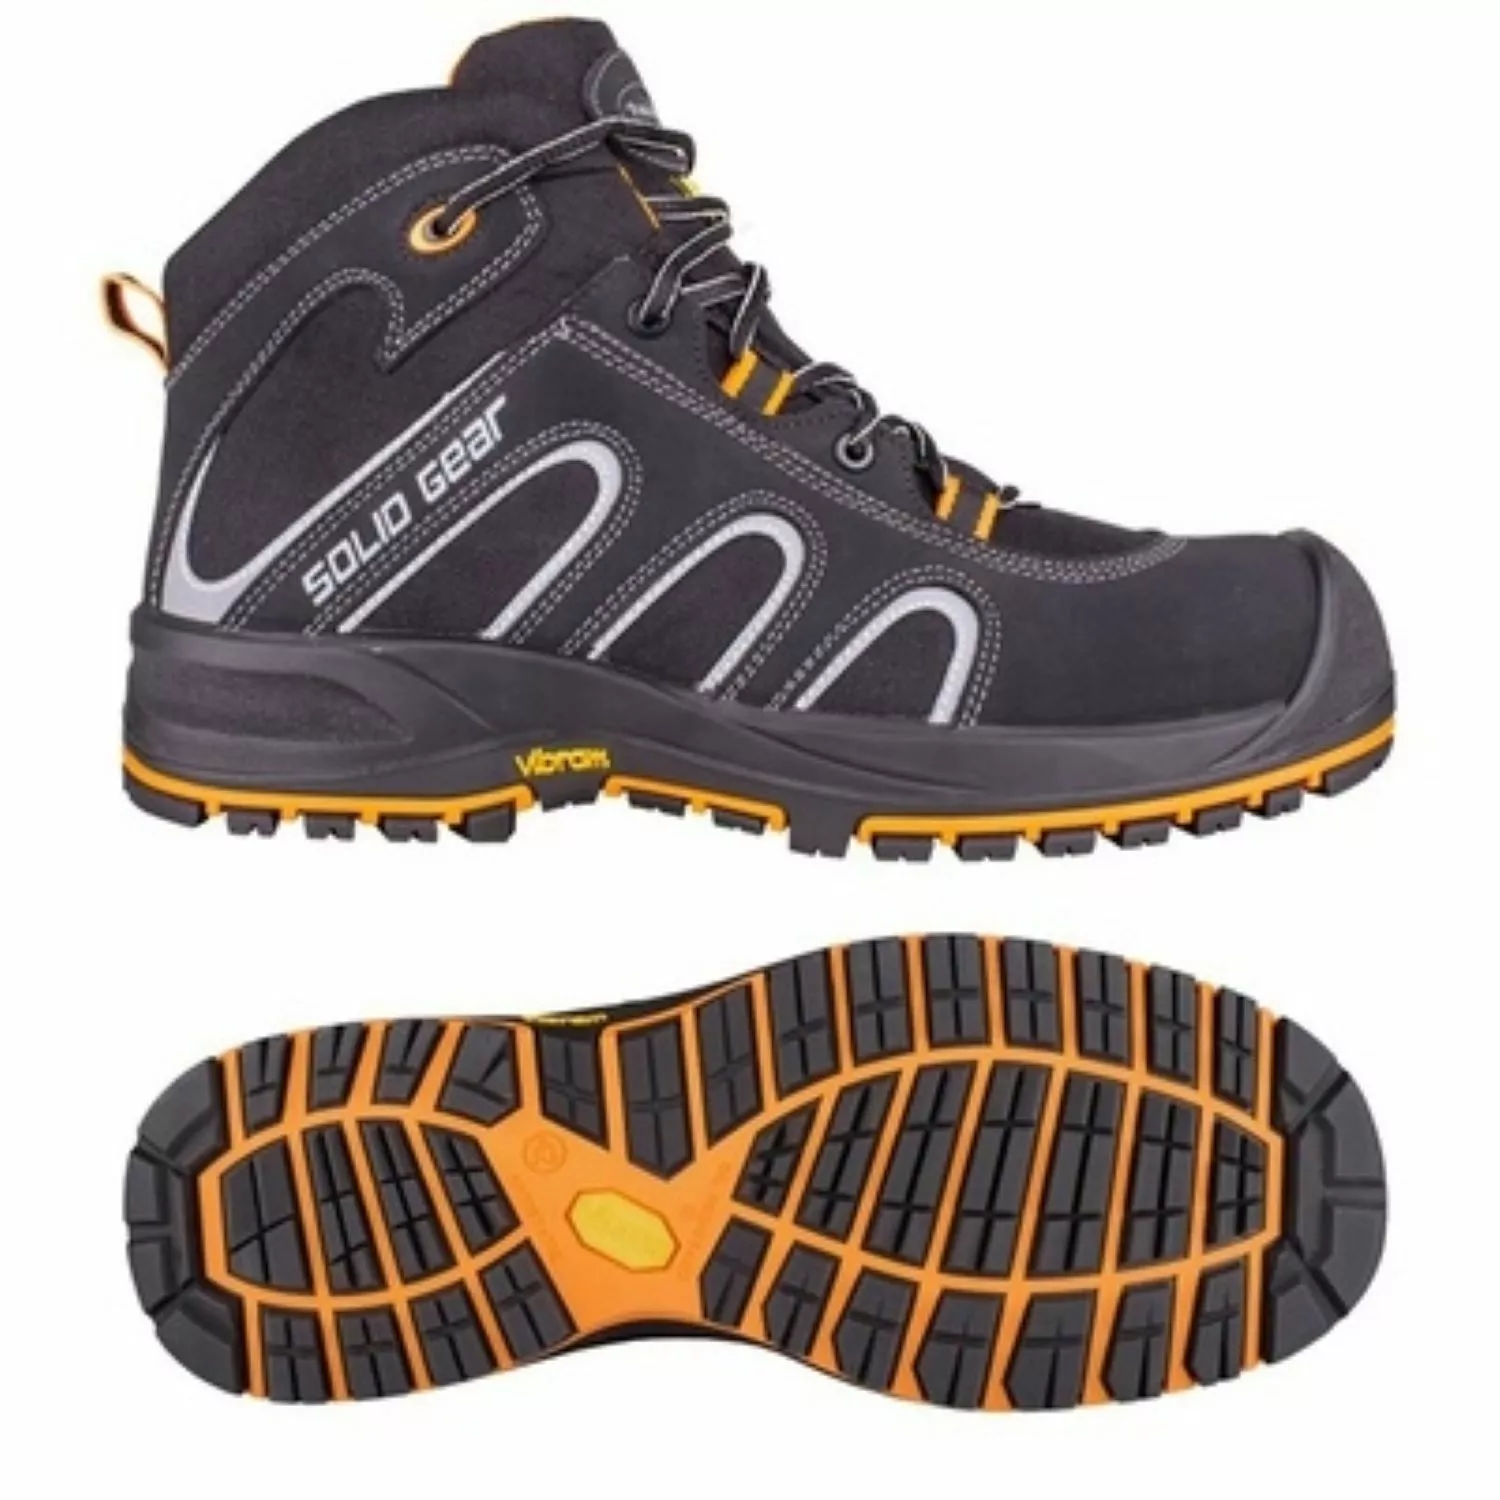 Solid Gear 73002 Falcon chaussures de travail - taille 44-image